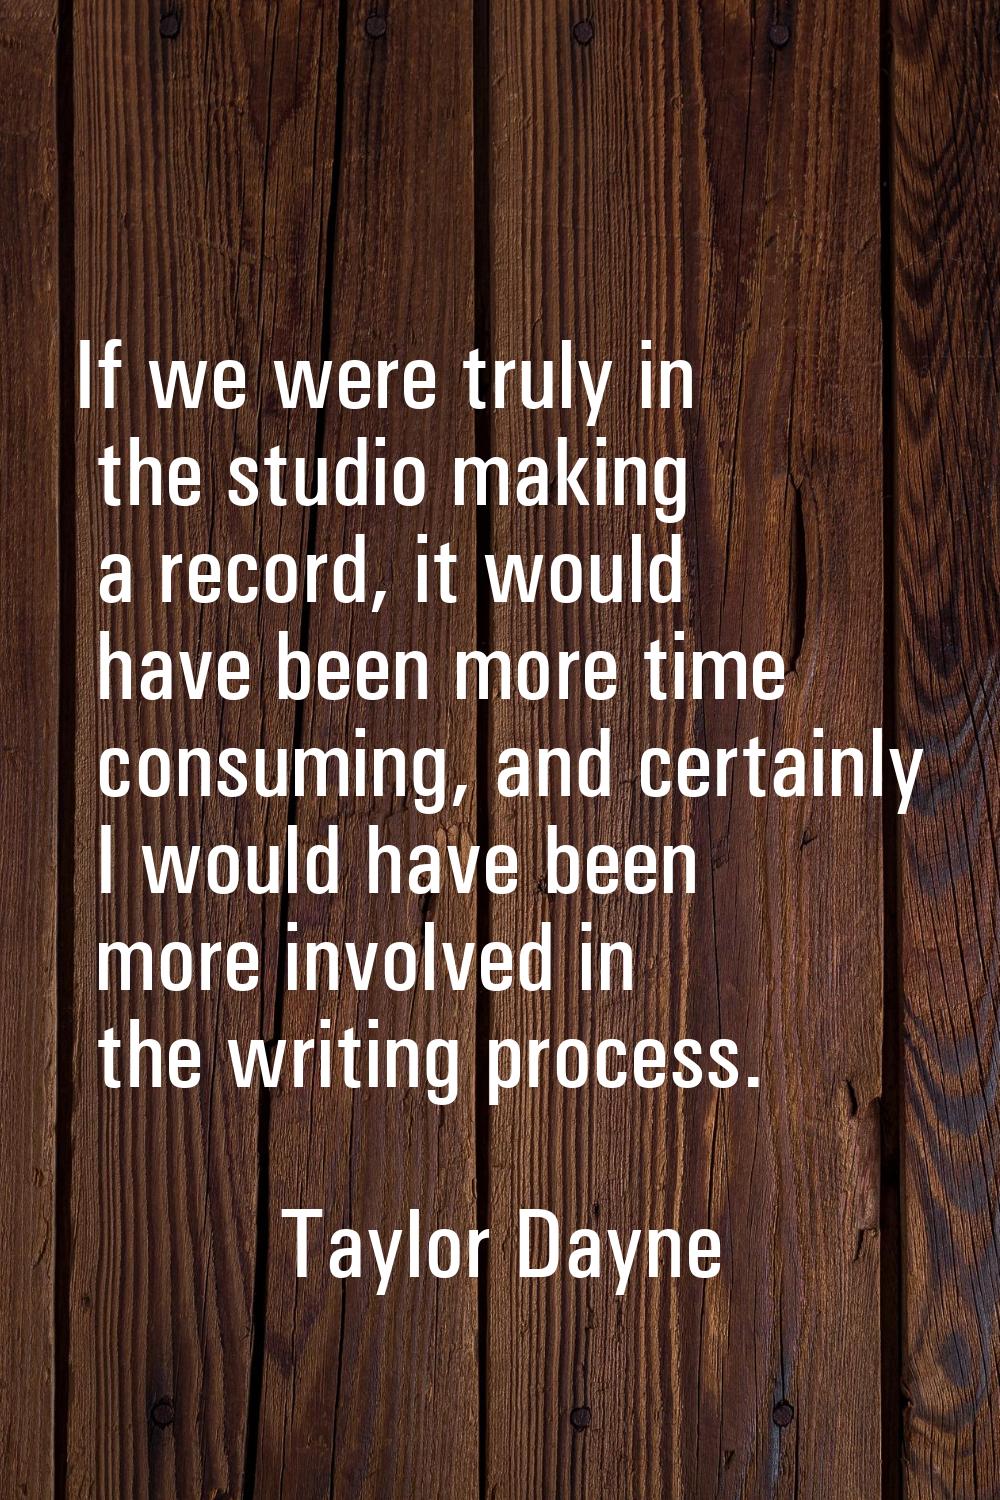 If we were truly in the studio making a record, it would have been more time consuming, and certain